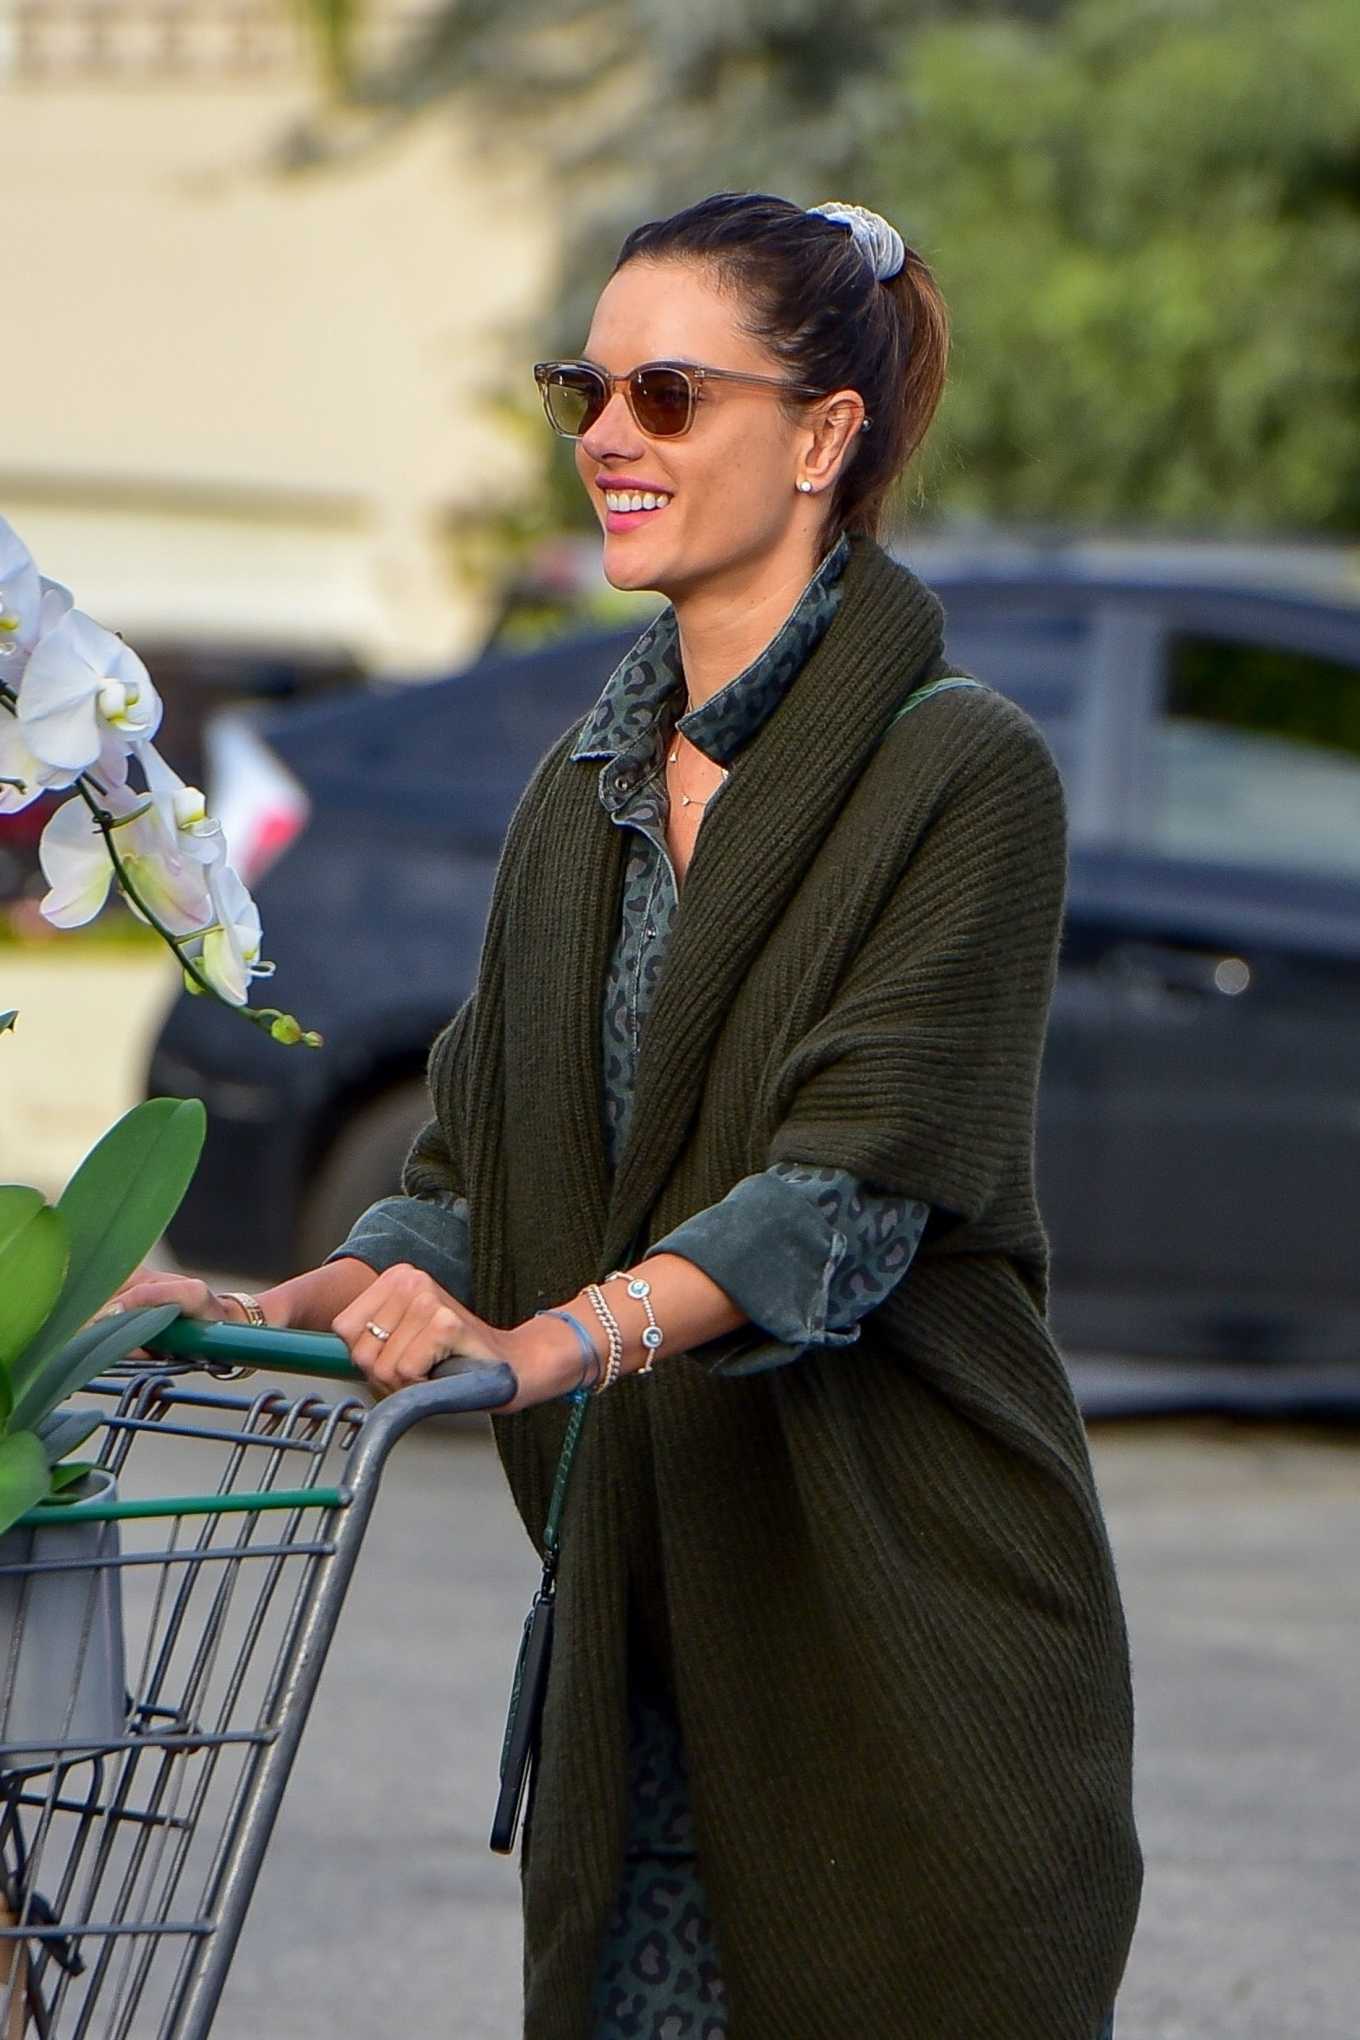 Alessandra Ambrosio â€“ Grocery Shopping During â€˜Stay At Homeâ€™ Order In Santa Monica